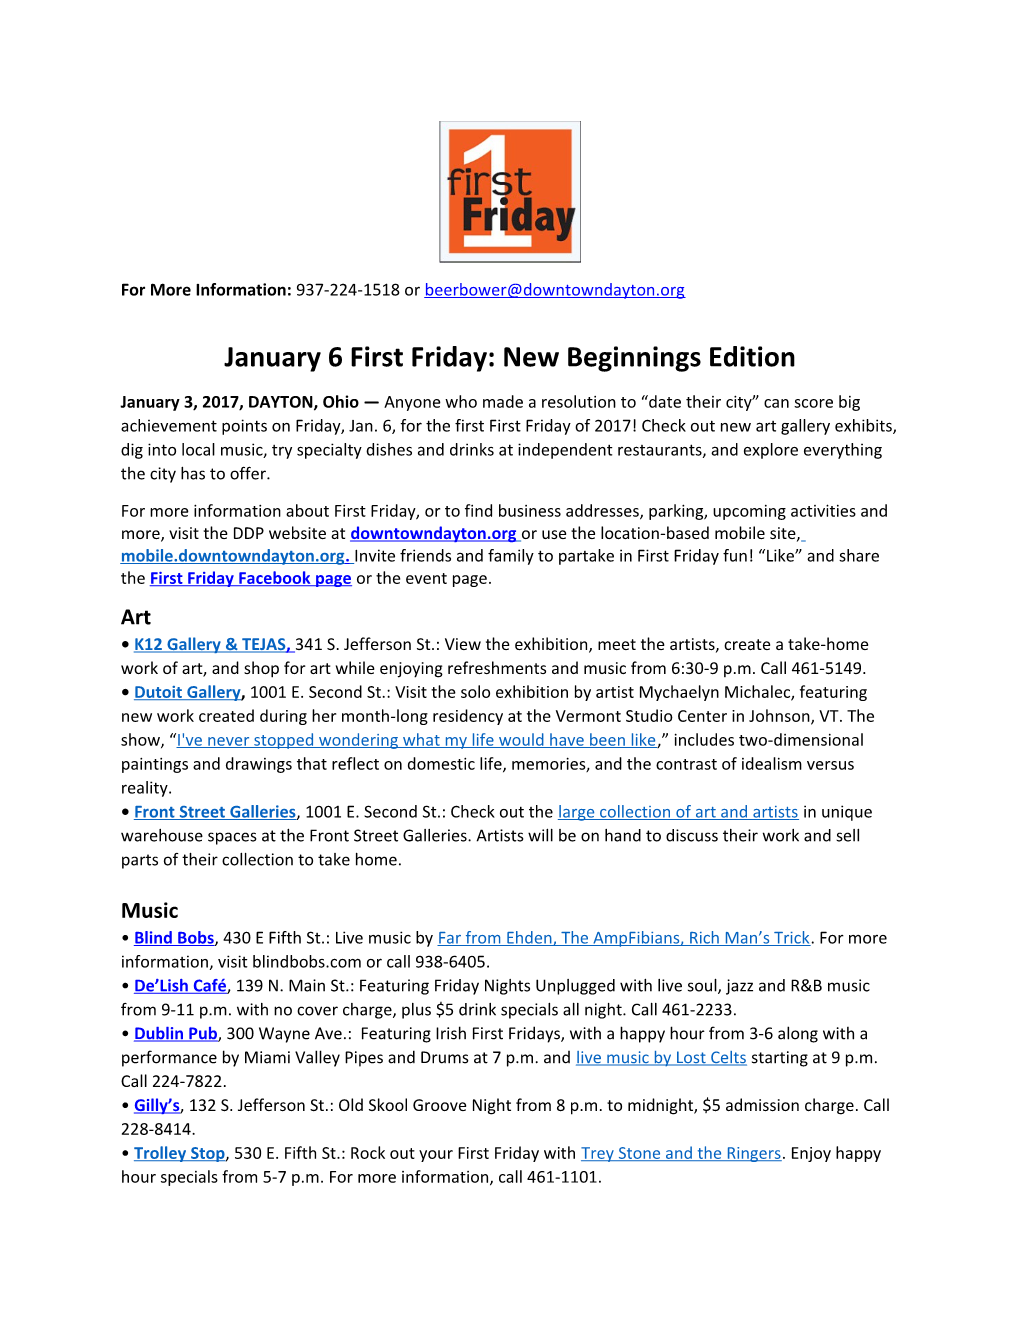 January 6 First Friday: New Beginnings Edition